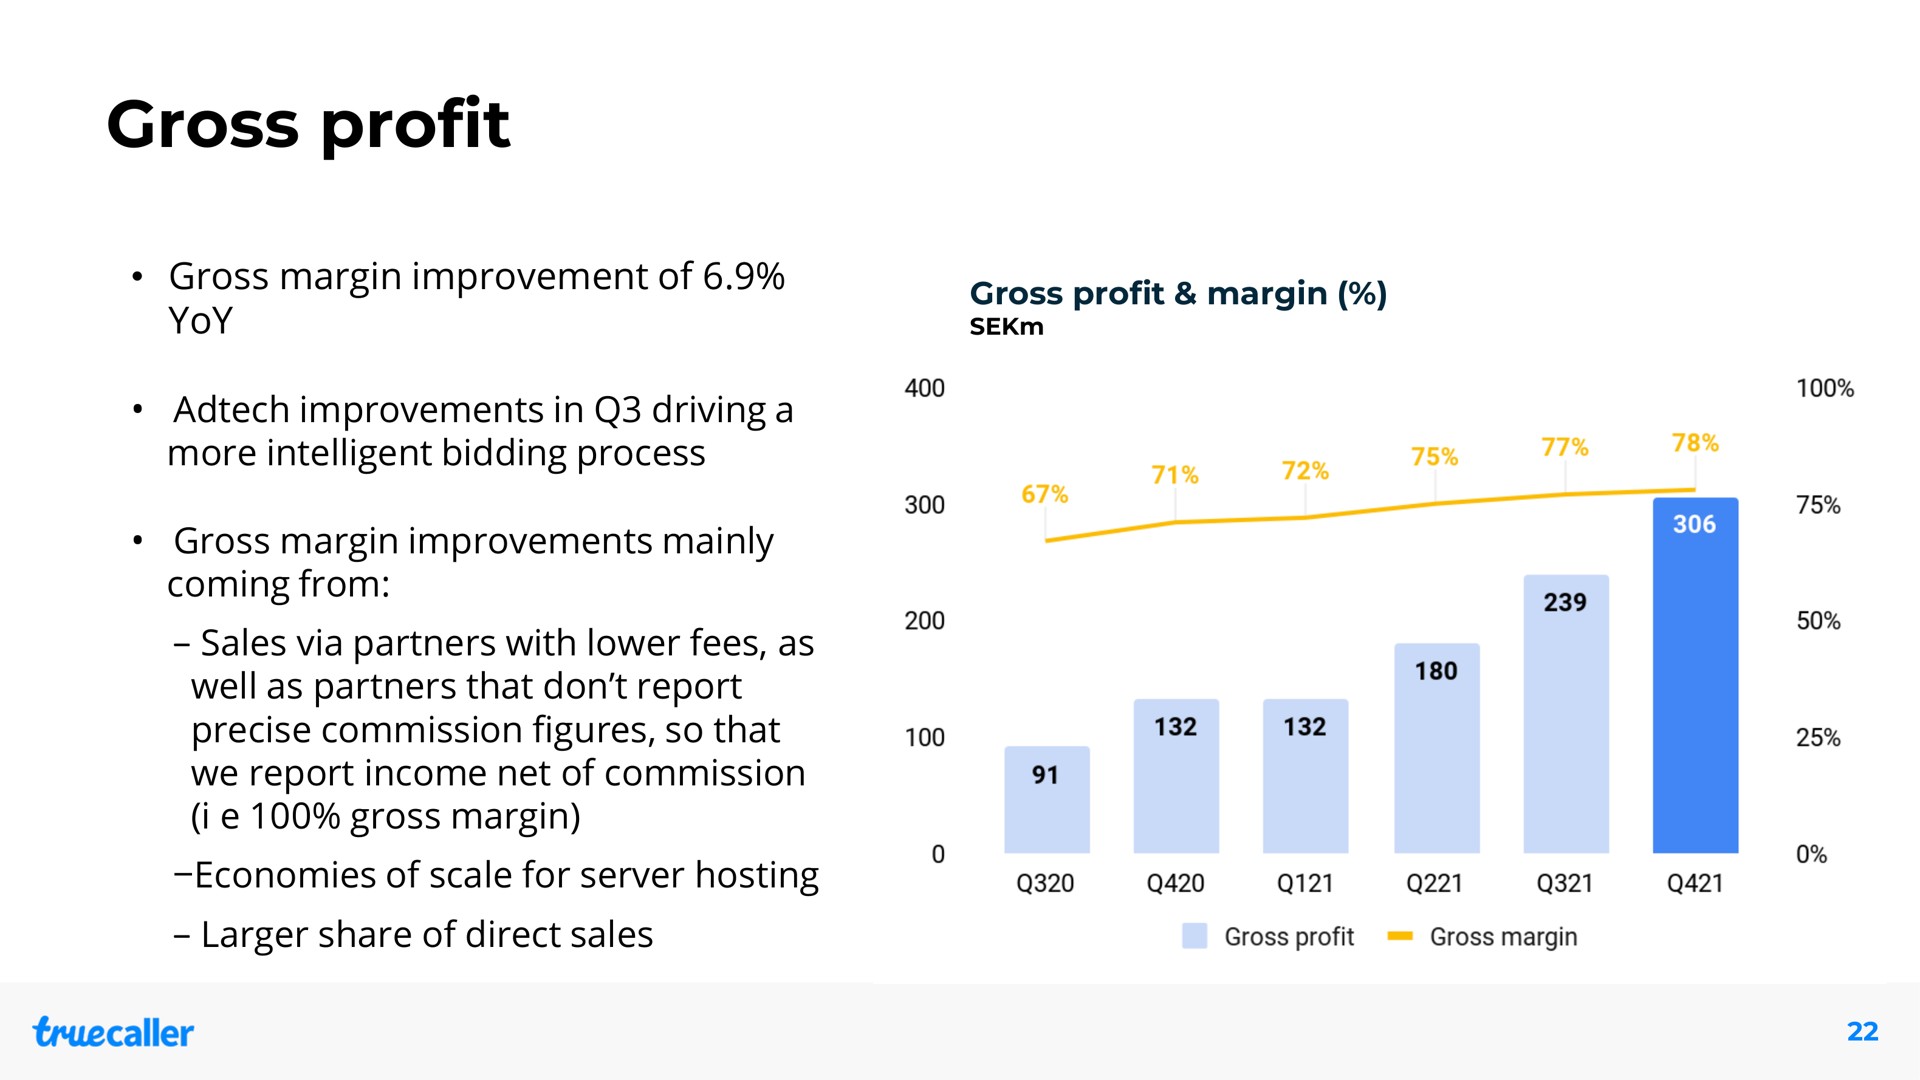 gross profit gross margin improvement of yoy improvements in driving a more intelligent bidding process gross margin improvements mainly coming from sales via partners with lower fees as well as partners that don report precise commission figures so that we report income net of commission i gross margin economies of scale for server hosting share of direct sales mos | Truecaller